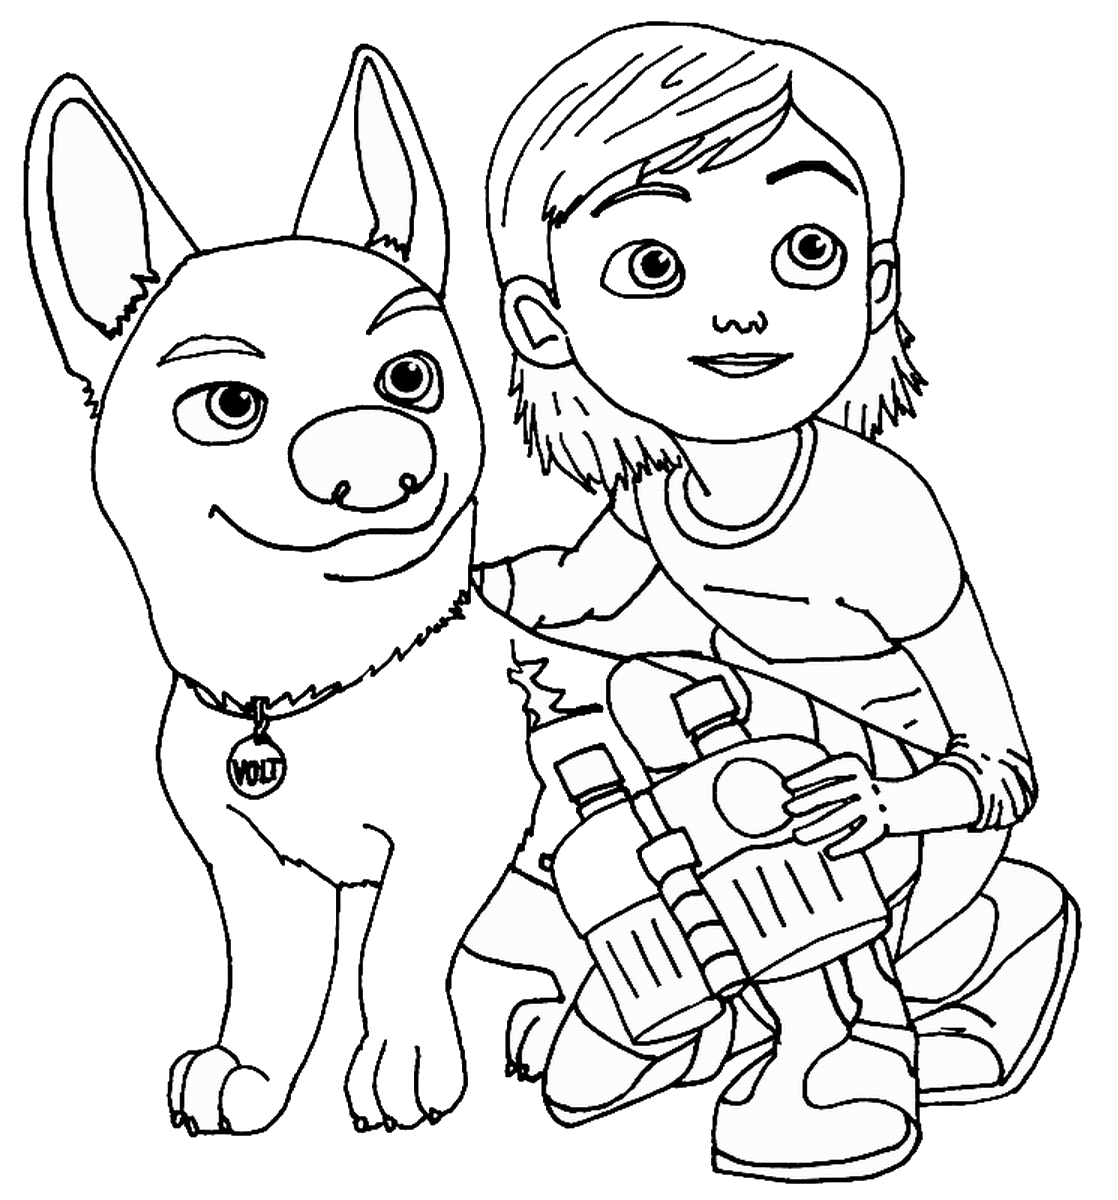 Cute Bolt And Penny Coloring Page - Free Printable Coloring Pages for Kids